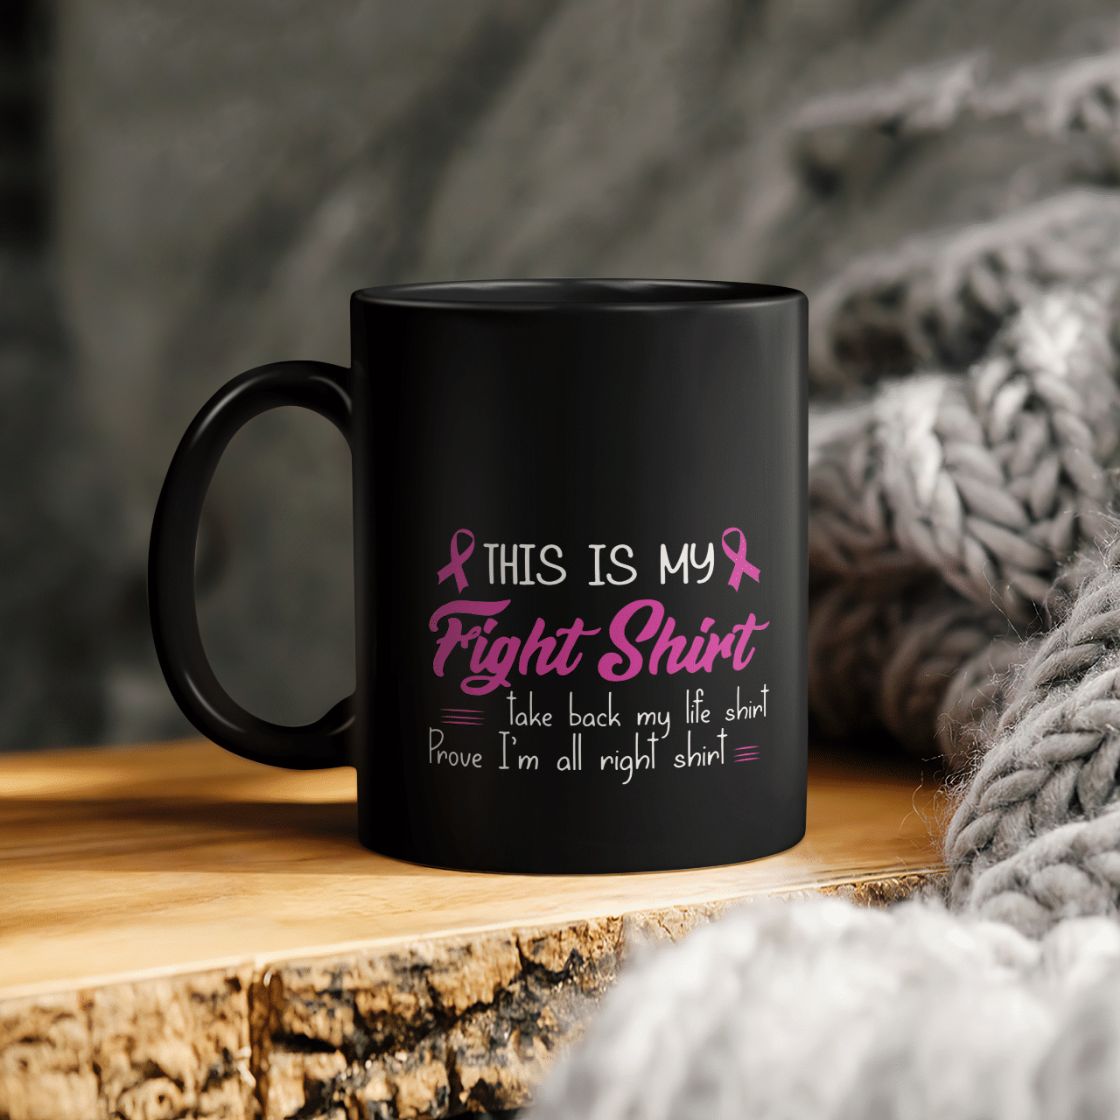 Breast Cancer Awareness This Is My Fight Shirt Take Back My Life Shirt Prove I Am All Right Shirt Ceramic Coffee Mug